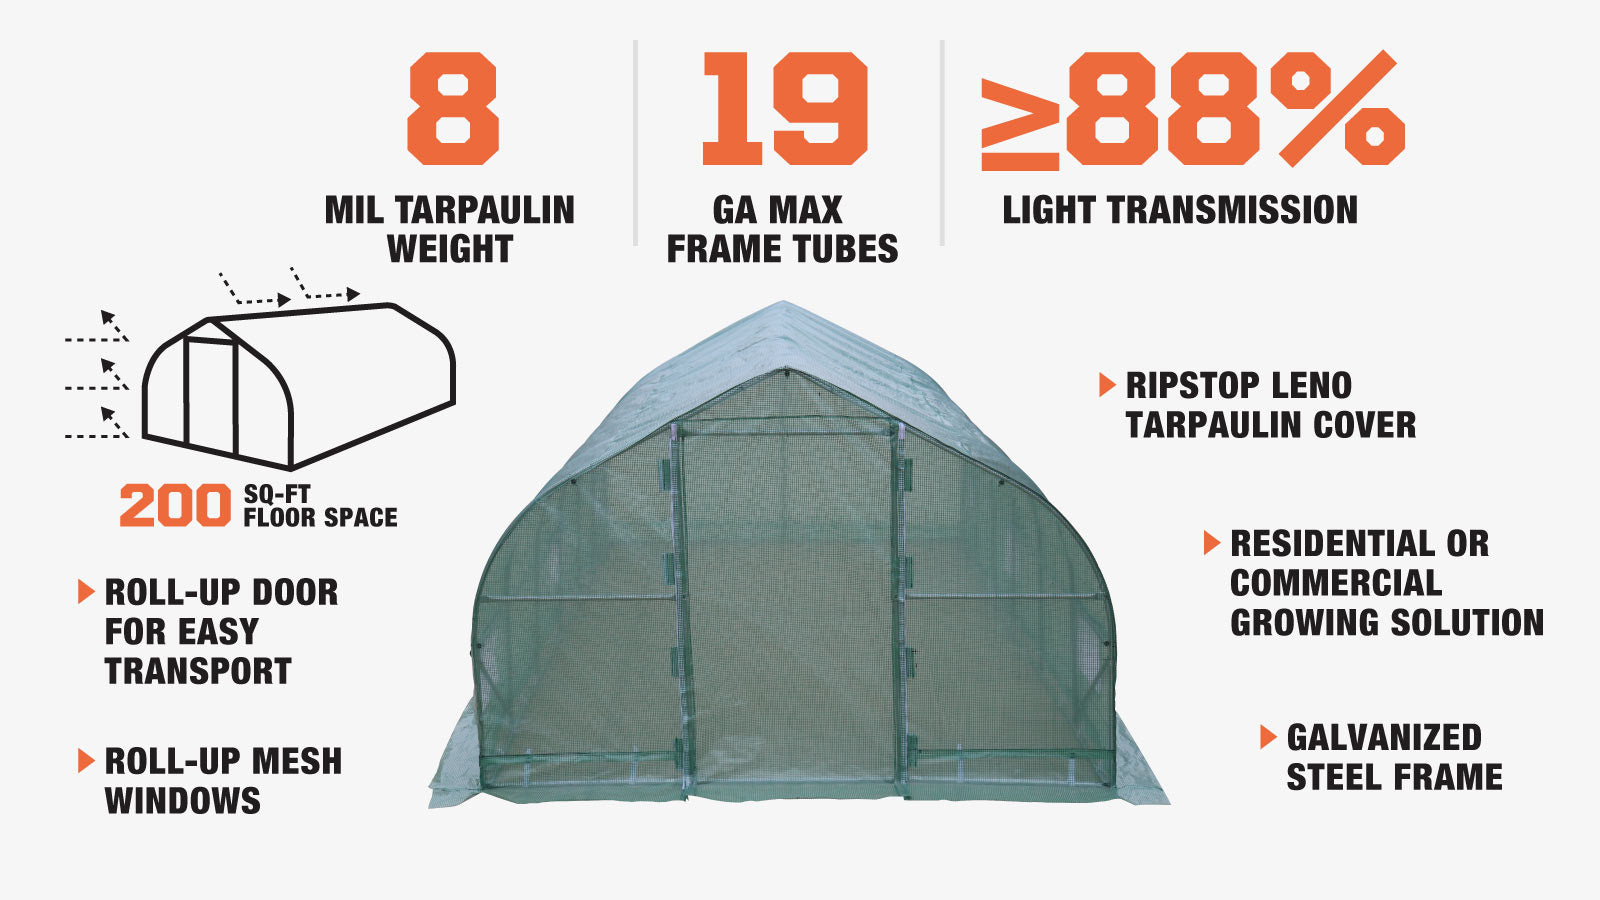 TMG Industrial 10’ x 20’ Tunnel Greenhouse Grow Tent w/Ripstop Leno Cover, Cold Frame, Roll-Up Mesh Windows, Peak Roof, TMG-GH1020P-description-image